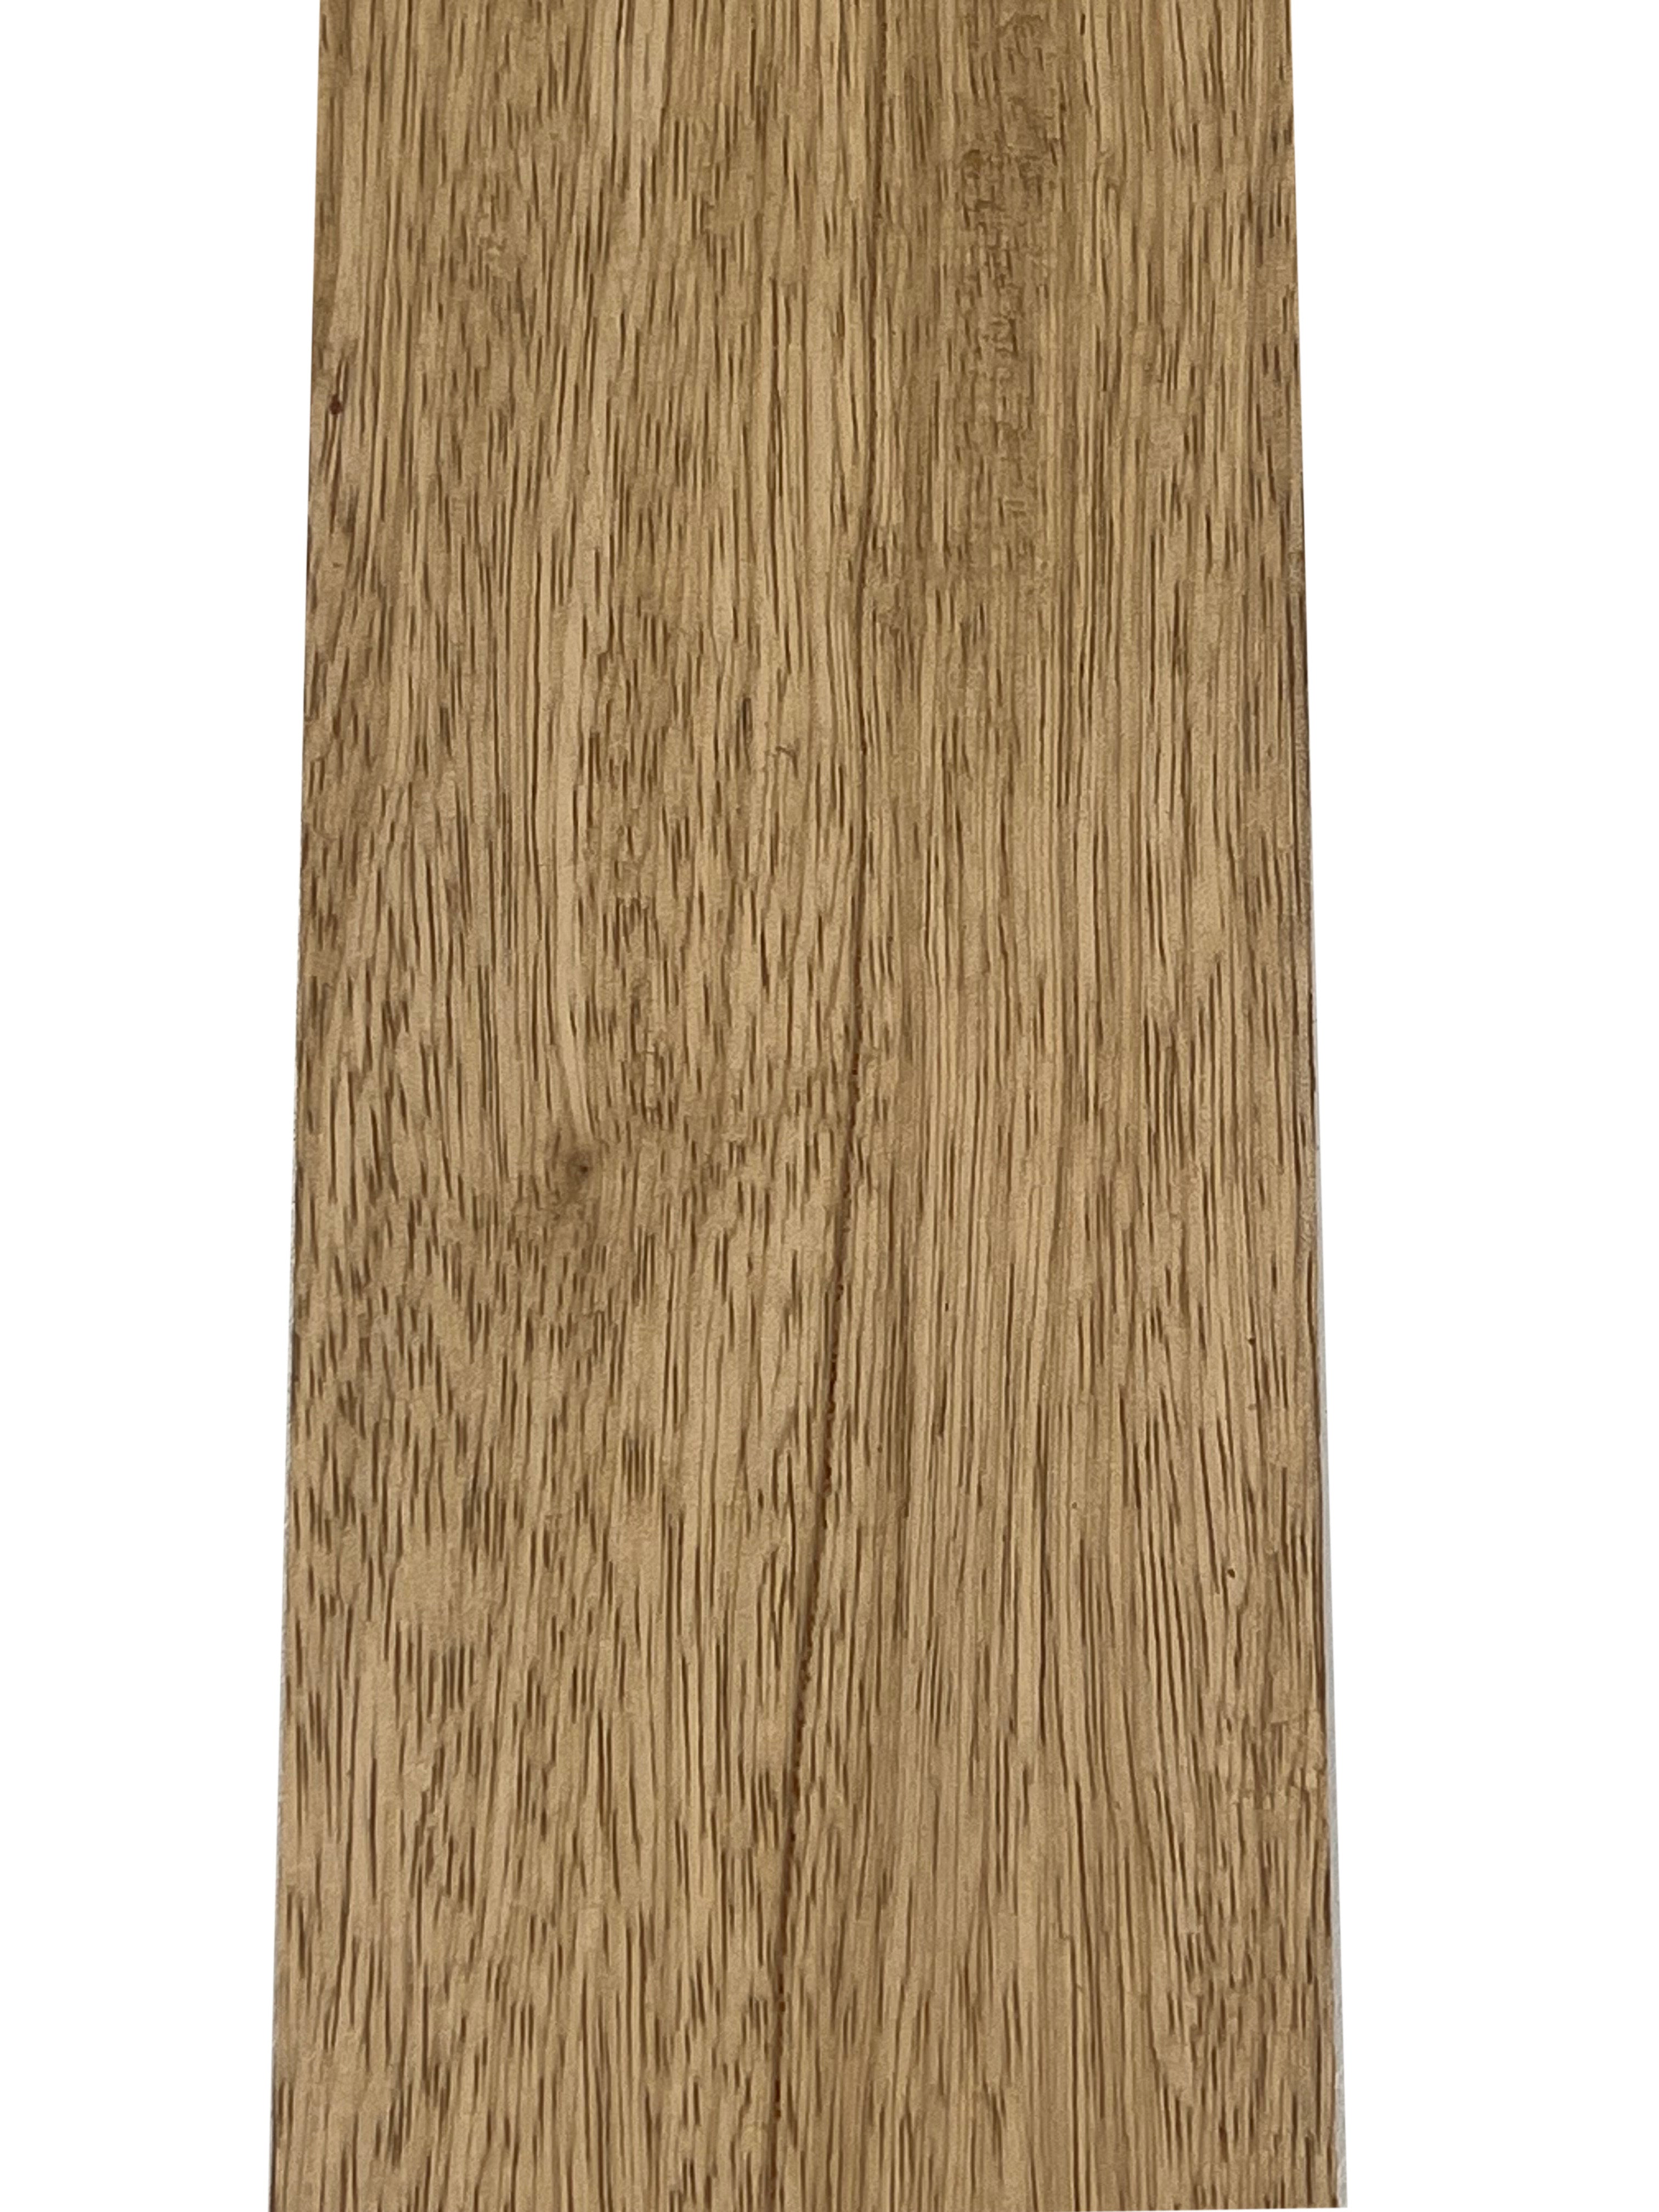 White Limba Thin Stock Lumber Boards Wood Crafts - Exotic Wood Zone - Buy online Across USA 